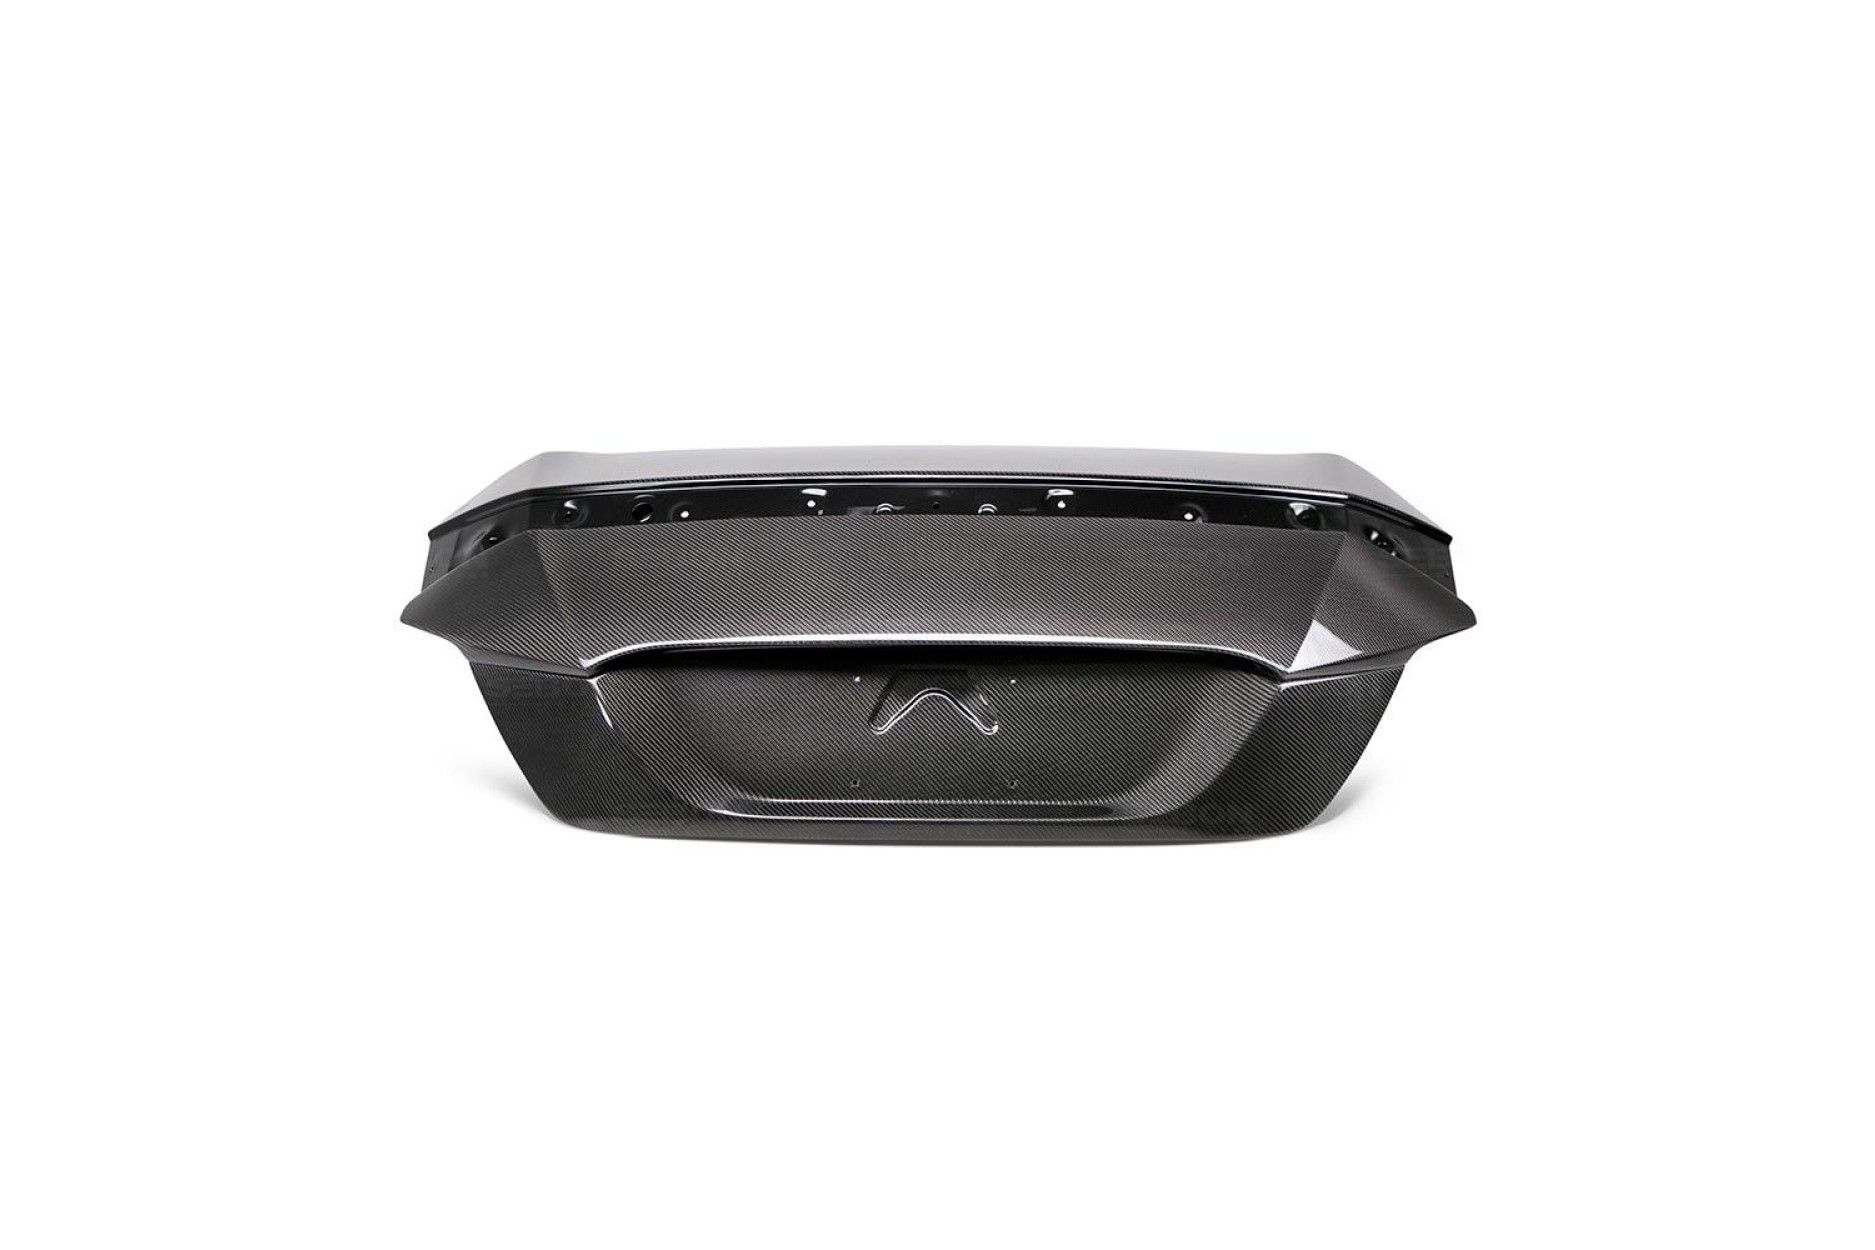 Seibon carbon TRUNK for HONDA CIVIC 2DR 2016-UP OE-style (2) 